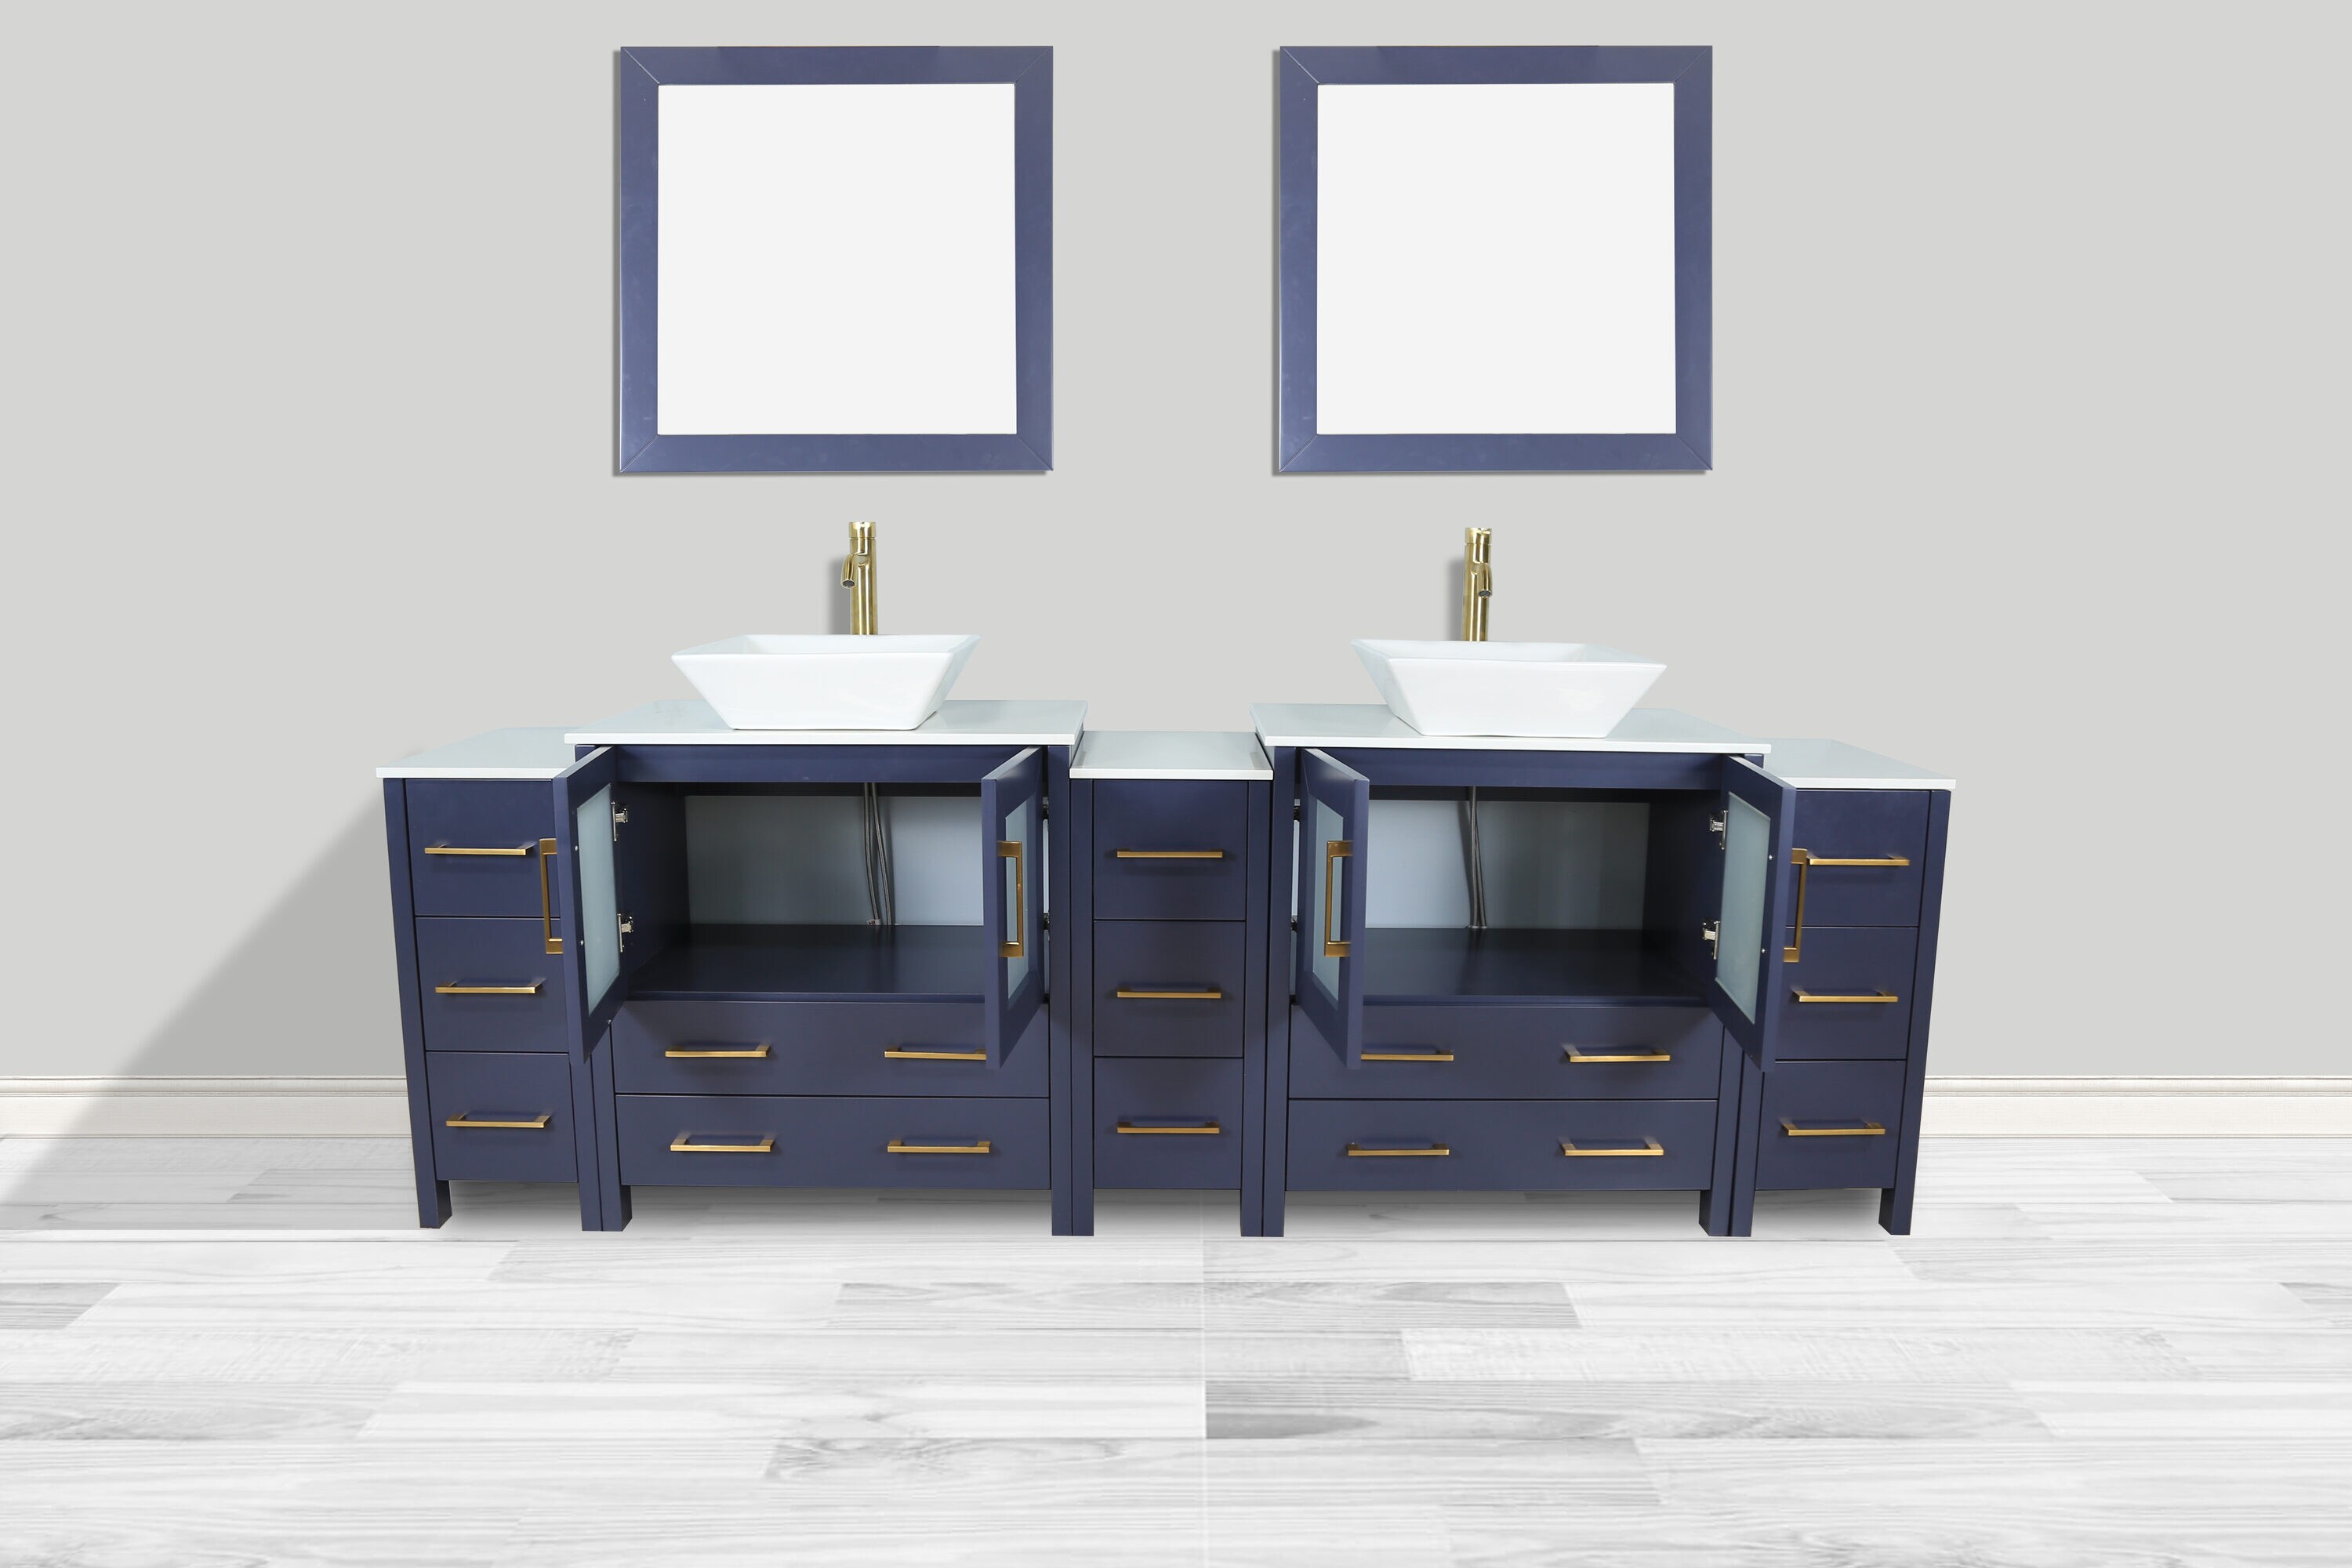 Vanity Art Ravenna 96 Double Gray Freestanding Vanity Set With White  Engineered Marble Top, 2 Ceramic Vessel Sinks, 2 Side Cabinets and 2 Mirrors